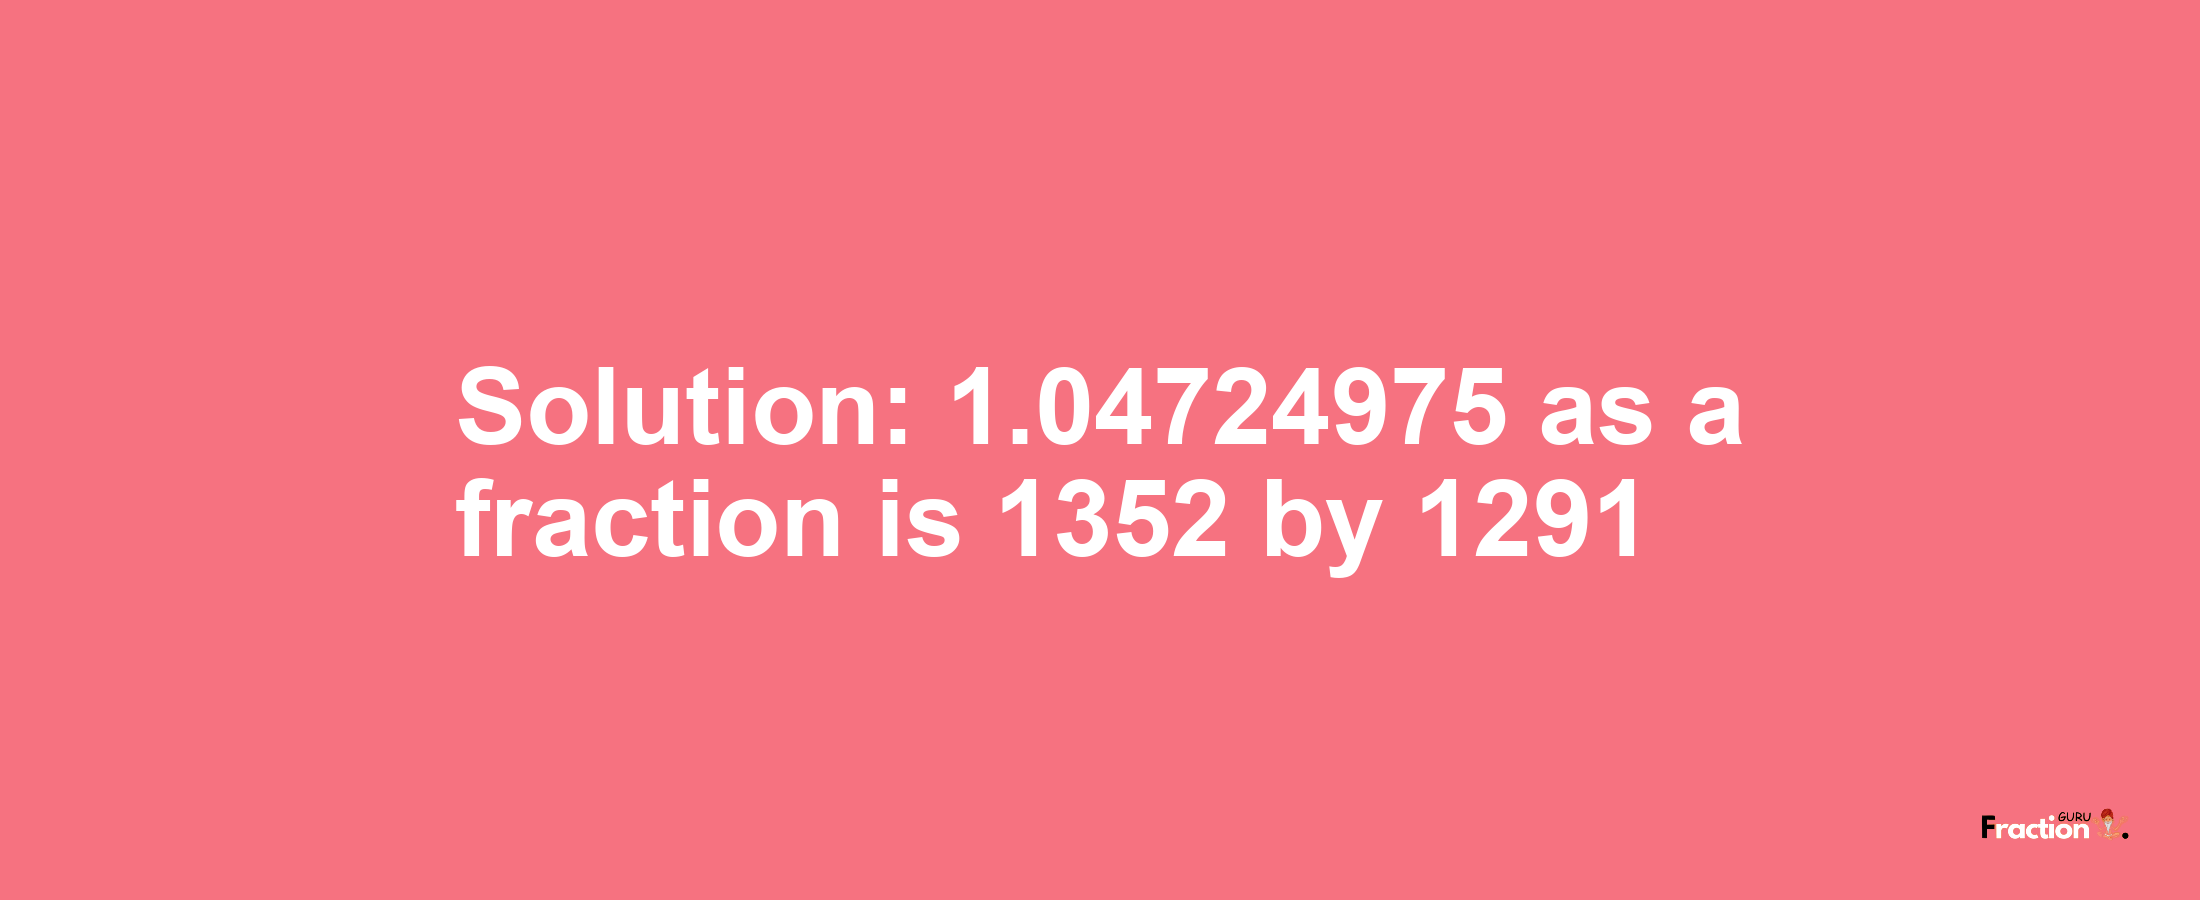 Solution:1.04724975 as a fraction is 1352/1291